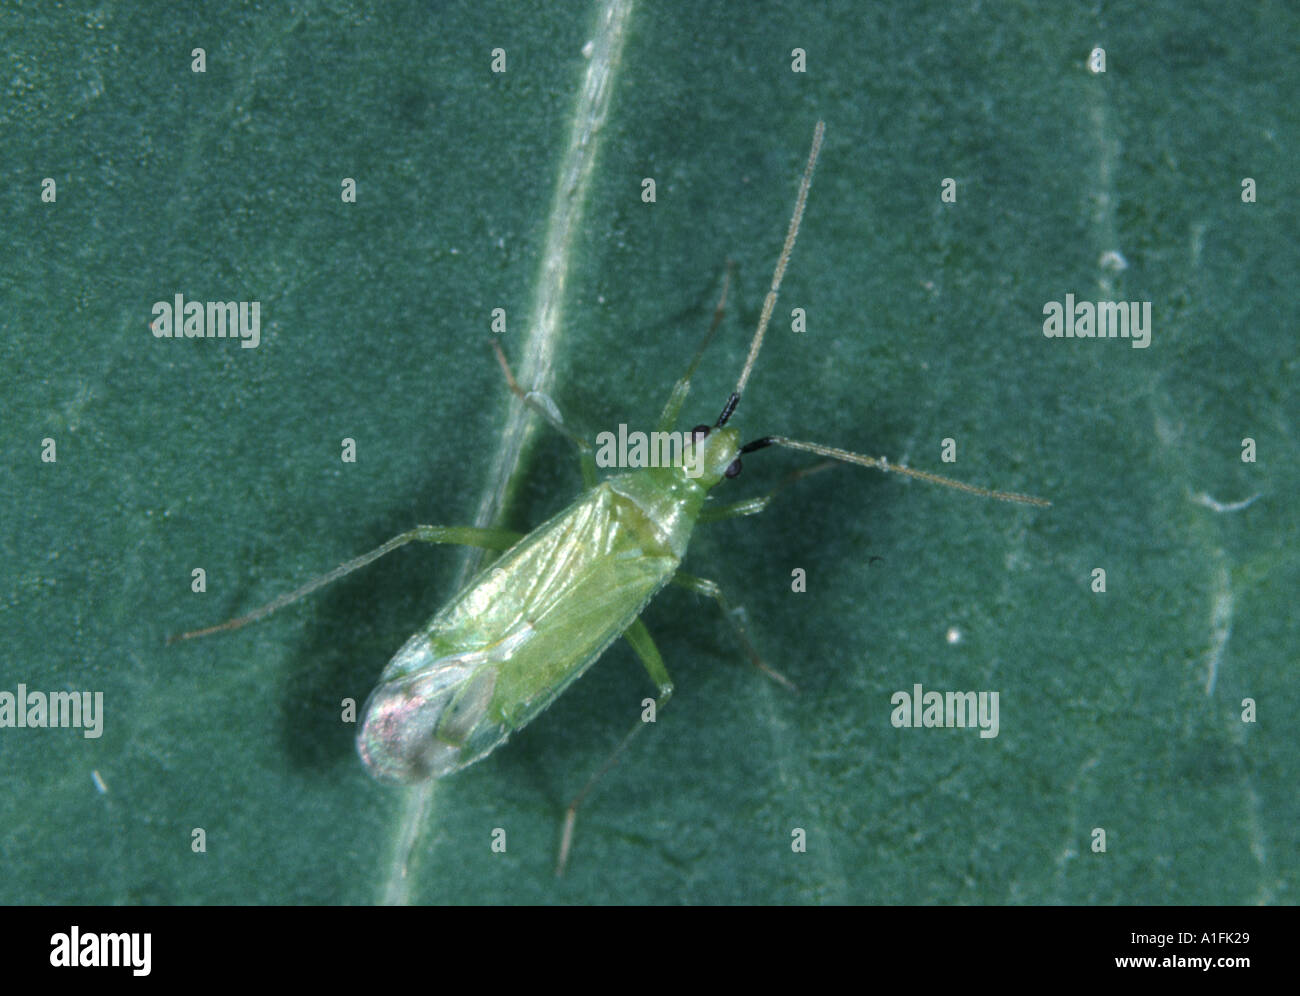 Mirid bug predator Macrolophus pygmaeus biocontrol insect for control of whitefly and other small organisms Stock Photo